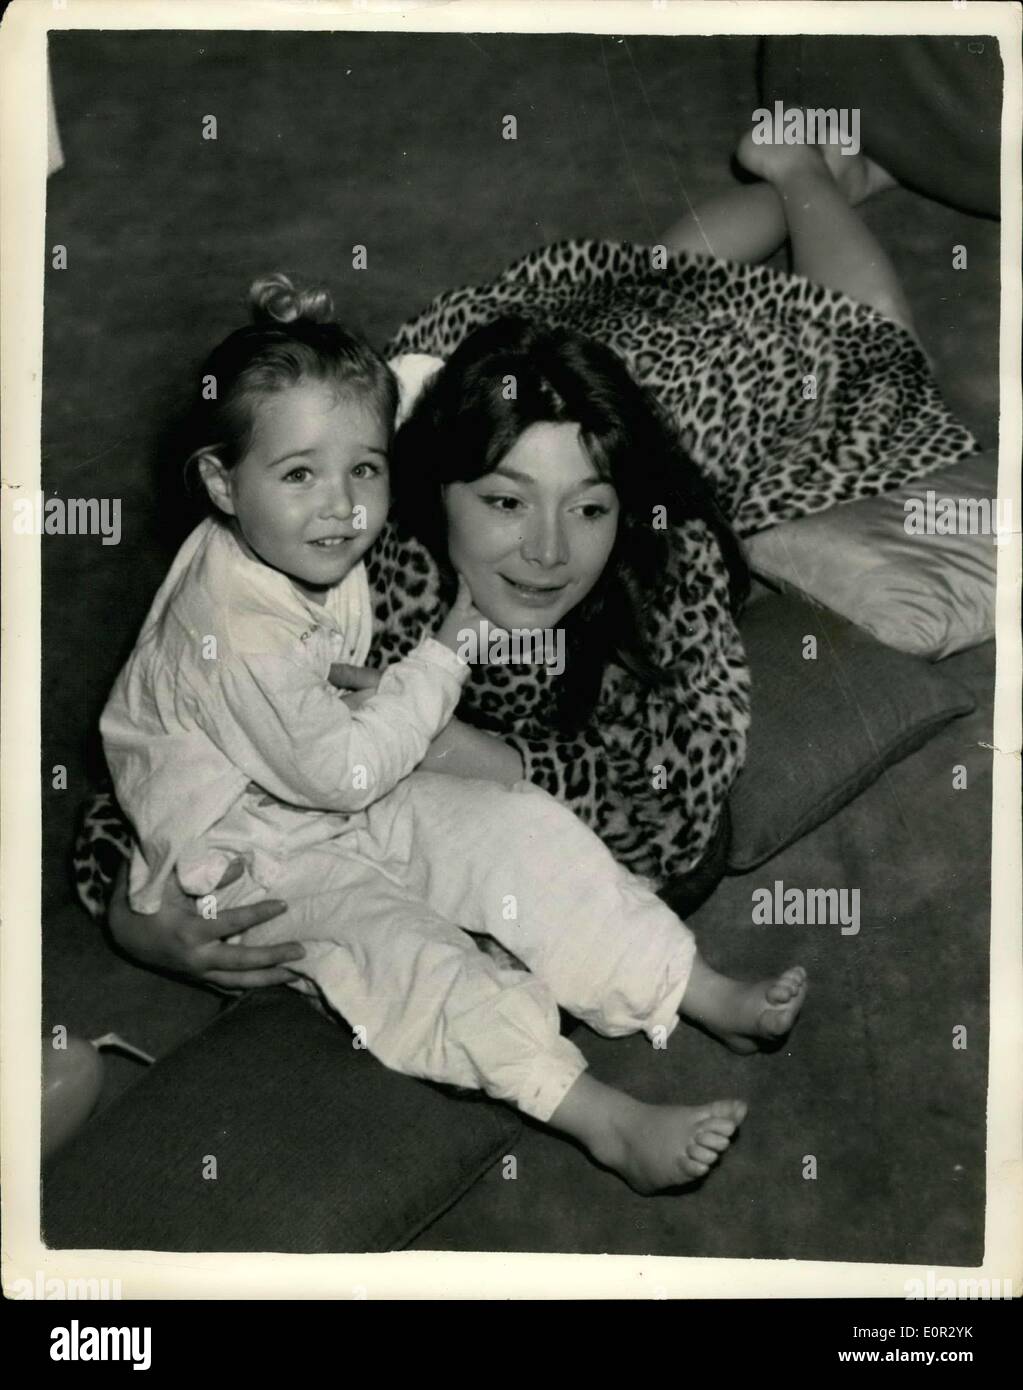 Oct. 31, 1957 - Existentalist Juliette Greco and her daughter: French singer Juliette Greco, High Priestess of Existentialism, has decided not to wait for tonight's premiere of her film ''The Sun also Rises''. True Mr. Darryl Zanuck had generously given her star billing alongside Ava Gardner and Tyrome Power for her seven minute-part in the 130 minute film. ''But'' she confessed, ''may part is really of no signifficance, so I'm off to Paris''. Staying with her at the Savoy Hotel is her 3-year-old daughter Laurence Stock Photo